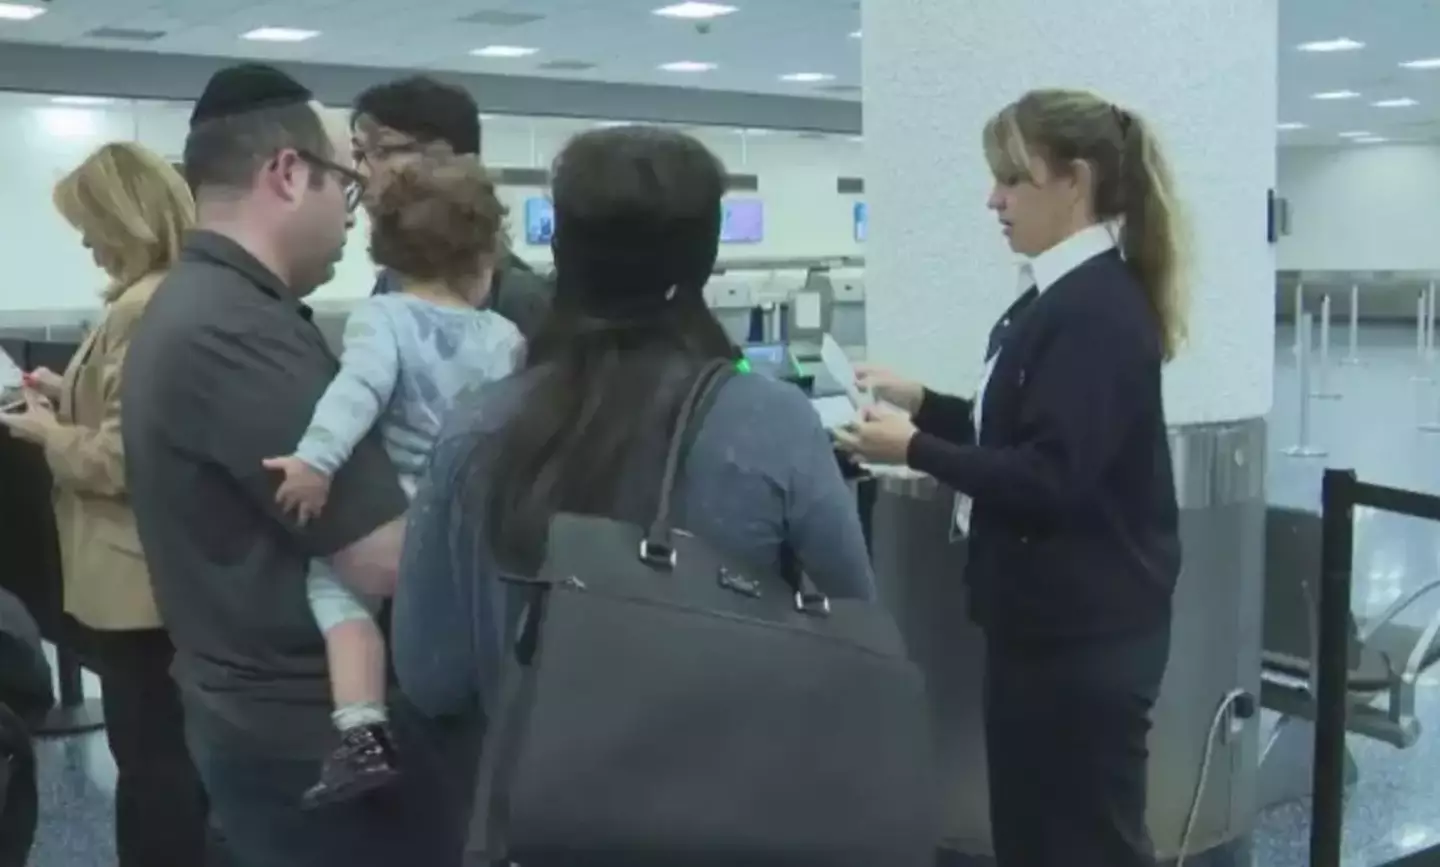 The family claim they were kicked off the American Airlines flight due to their body odor.